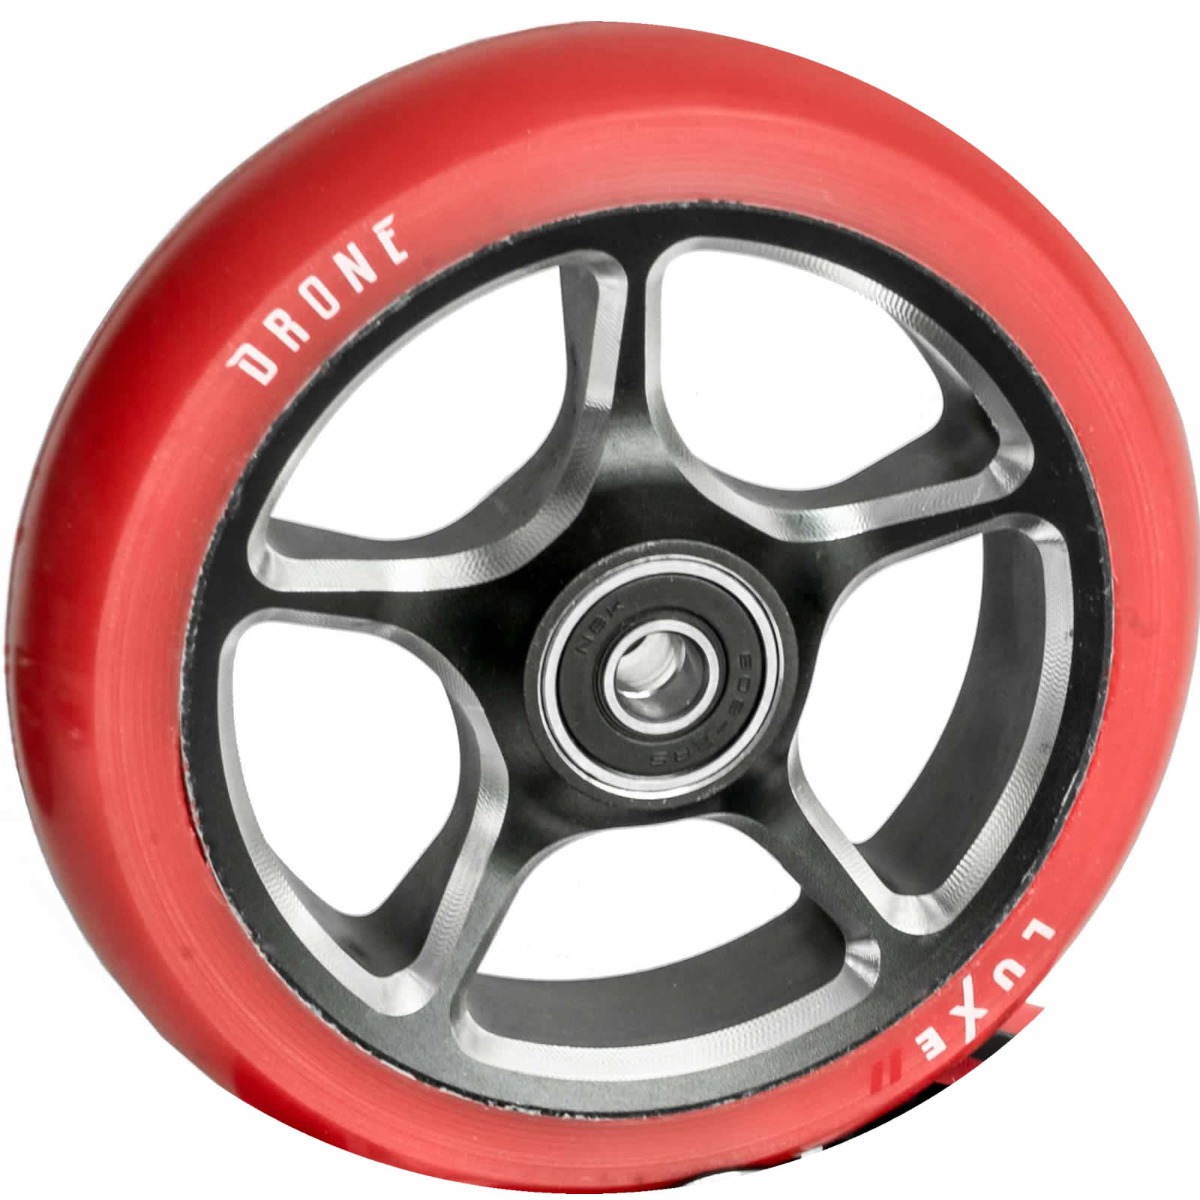 An image of Drone Luxe 2 110mm Scooter Wheel - Red